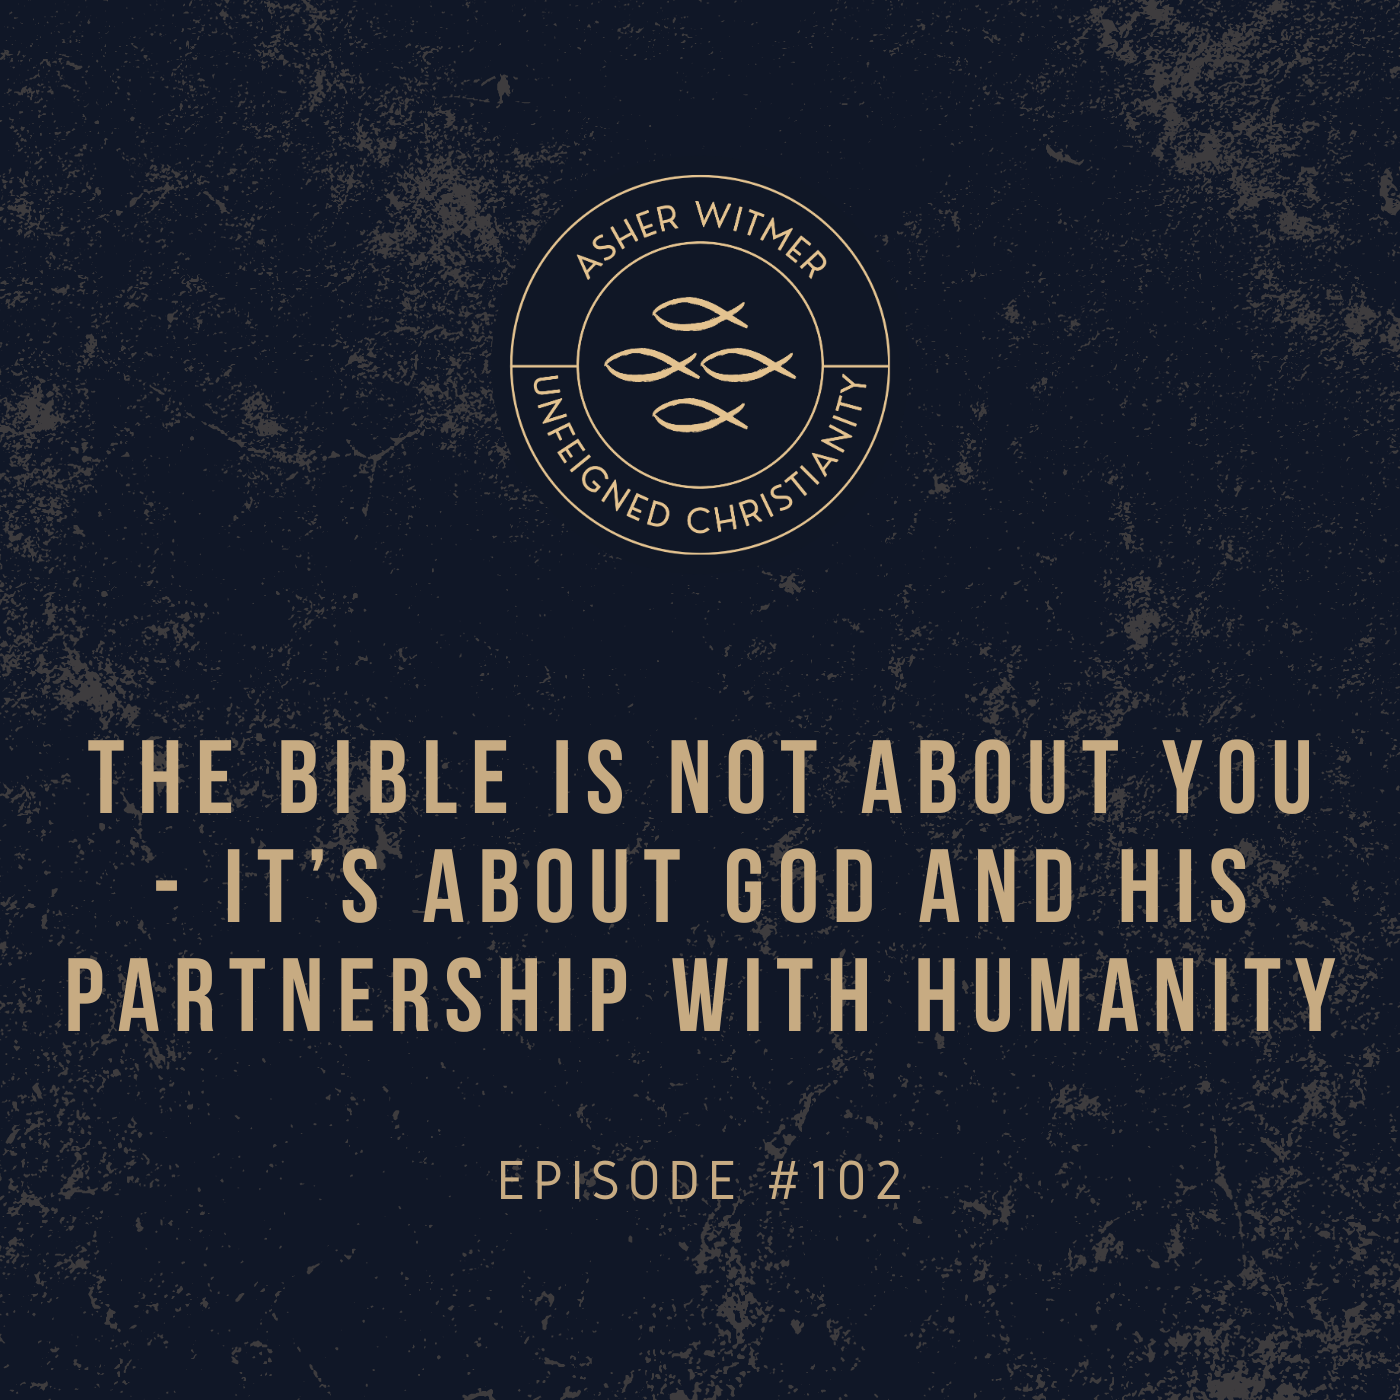 The Bible Is Not about You - It’s about God and His Partnership with Humanity